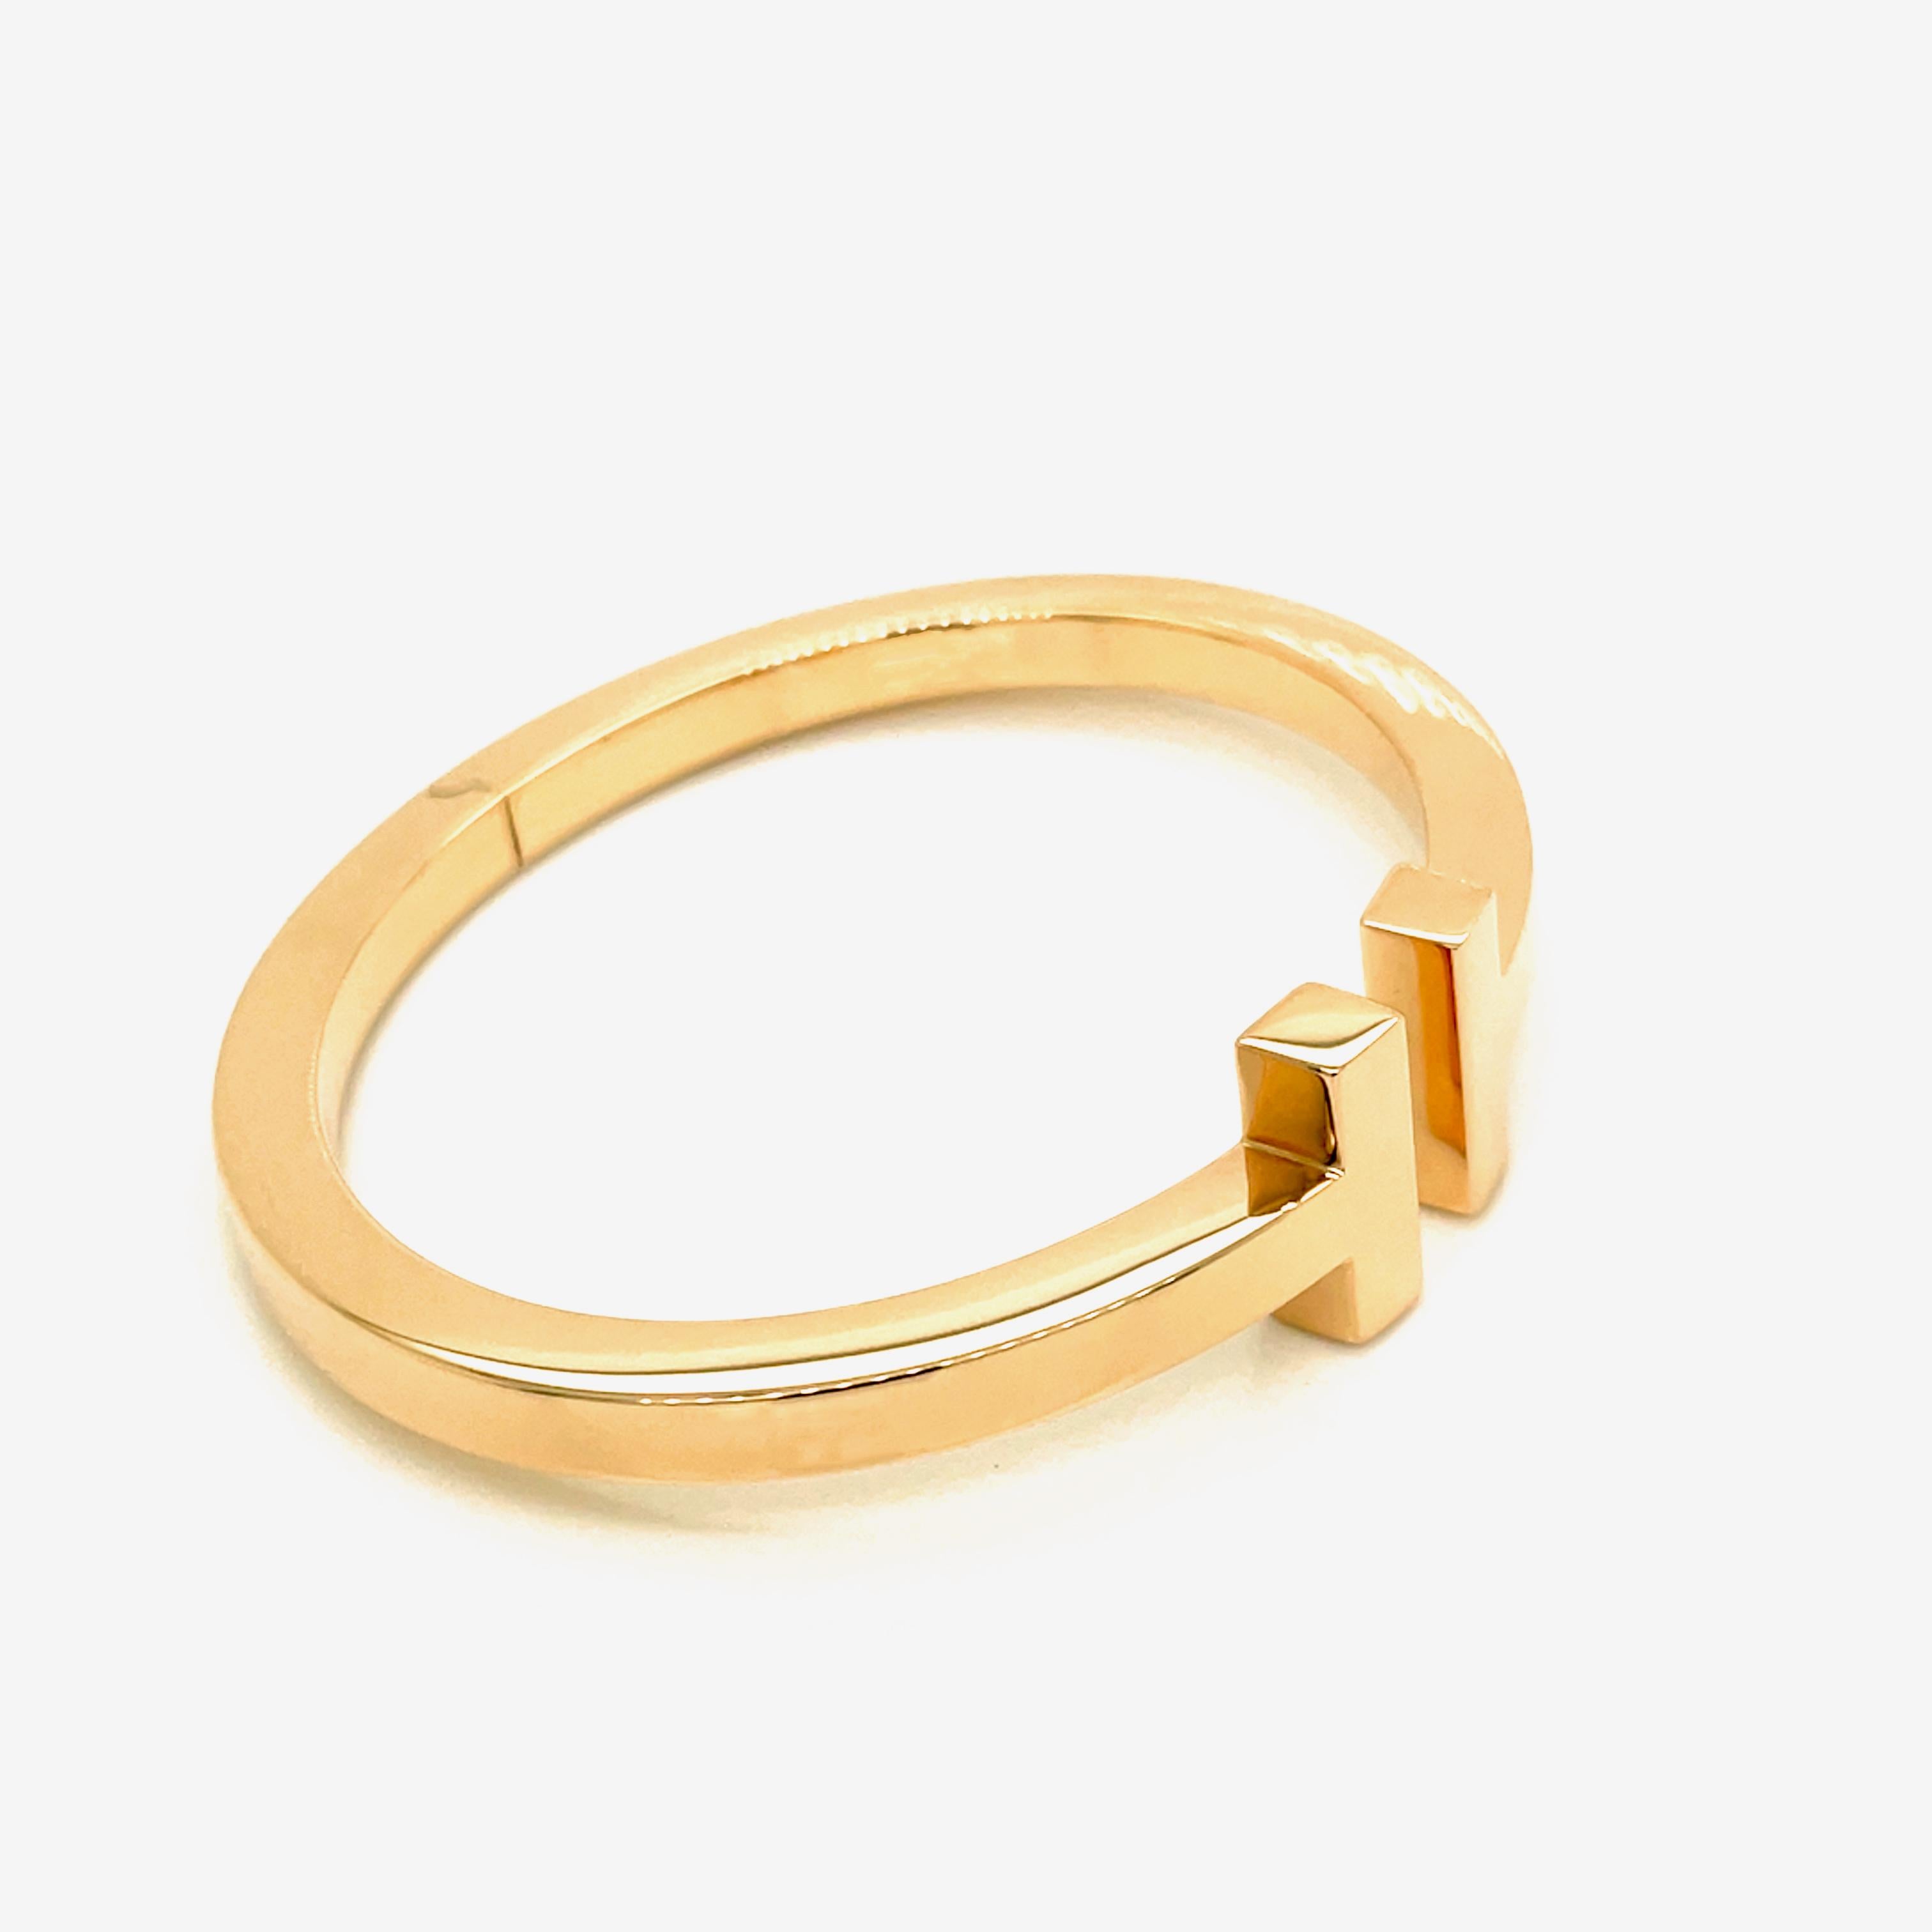 This bold bracelet exudes sophistication. As multifaceted as it is iconic, the Tiffany T collection is a tangible reminder of the connections we feel but can't always see. Wear this sleek design in a mixed-metal bracelet stack for a modern